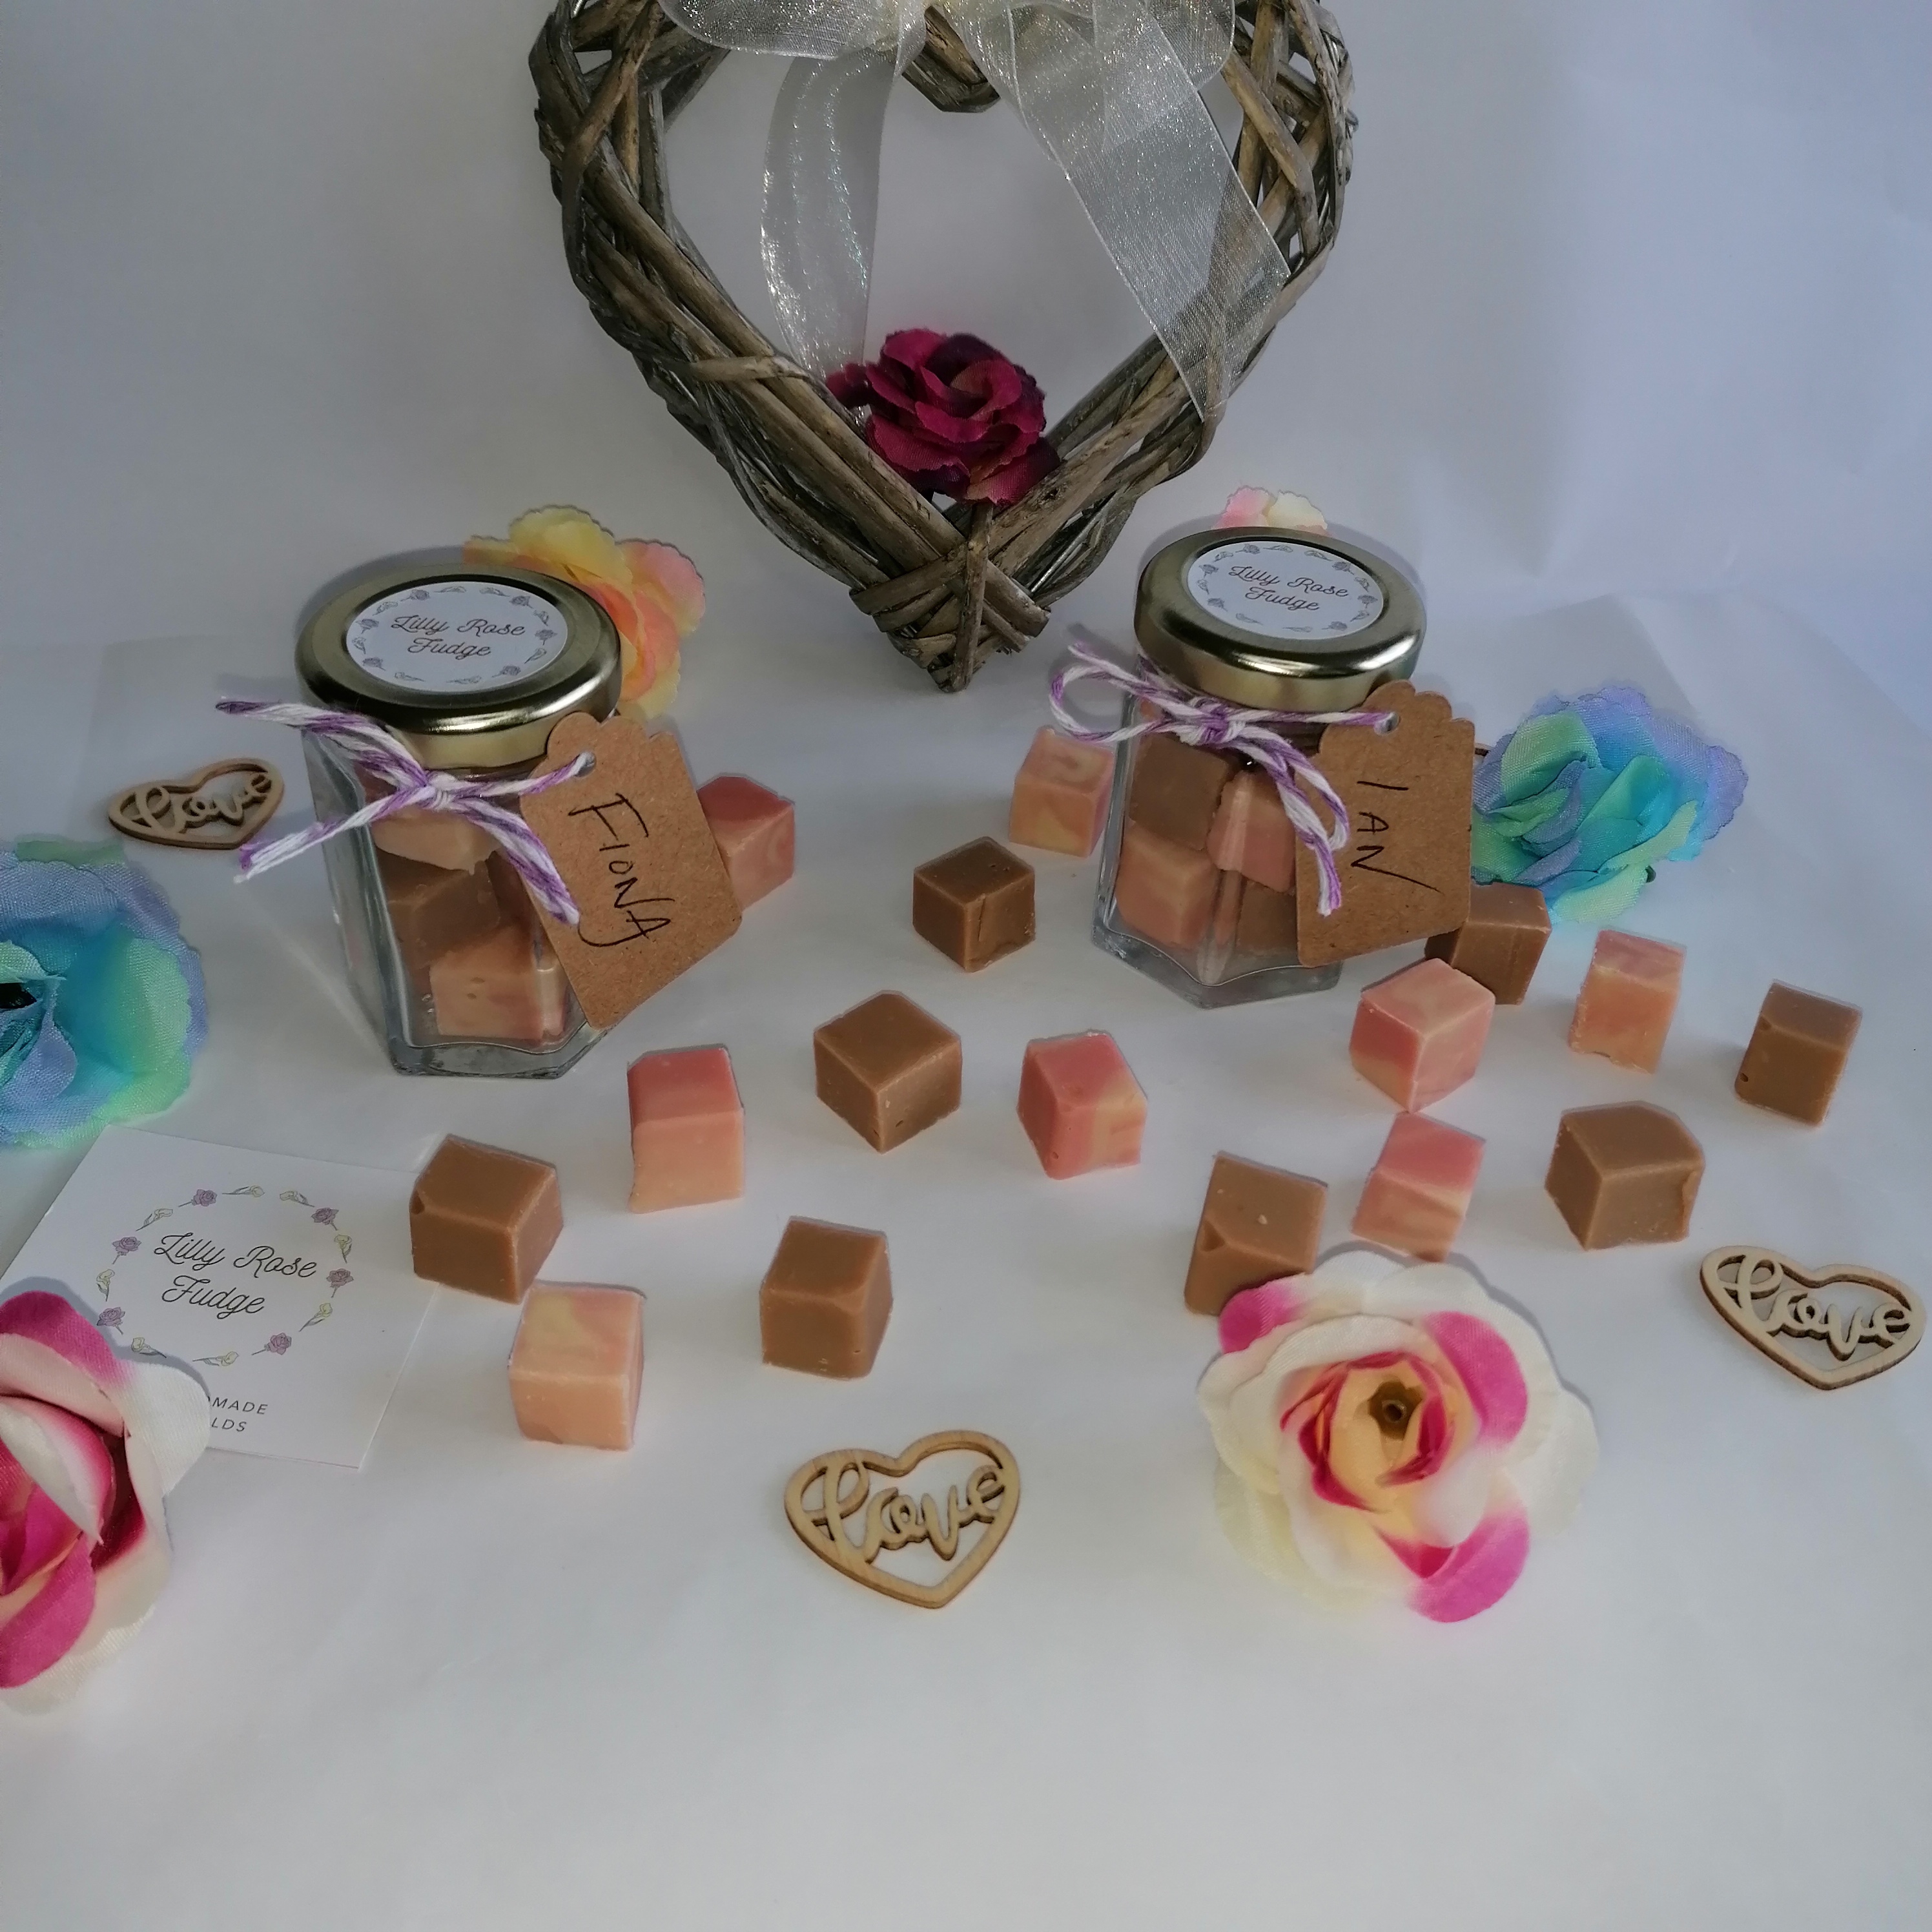 Two small glass jars filled with mini cubes of fudge, red and white twine with a brown kraft tag tied around the neck of the jar on the left and lilac and white twine with a kraft tag on the jar on the right. Cubes of fudge scattered around the bottom of the two jars. Behind the jars is a grey heart with a blue rose propped against the back.